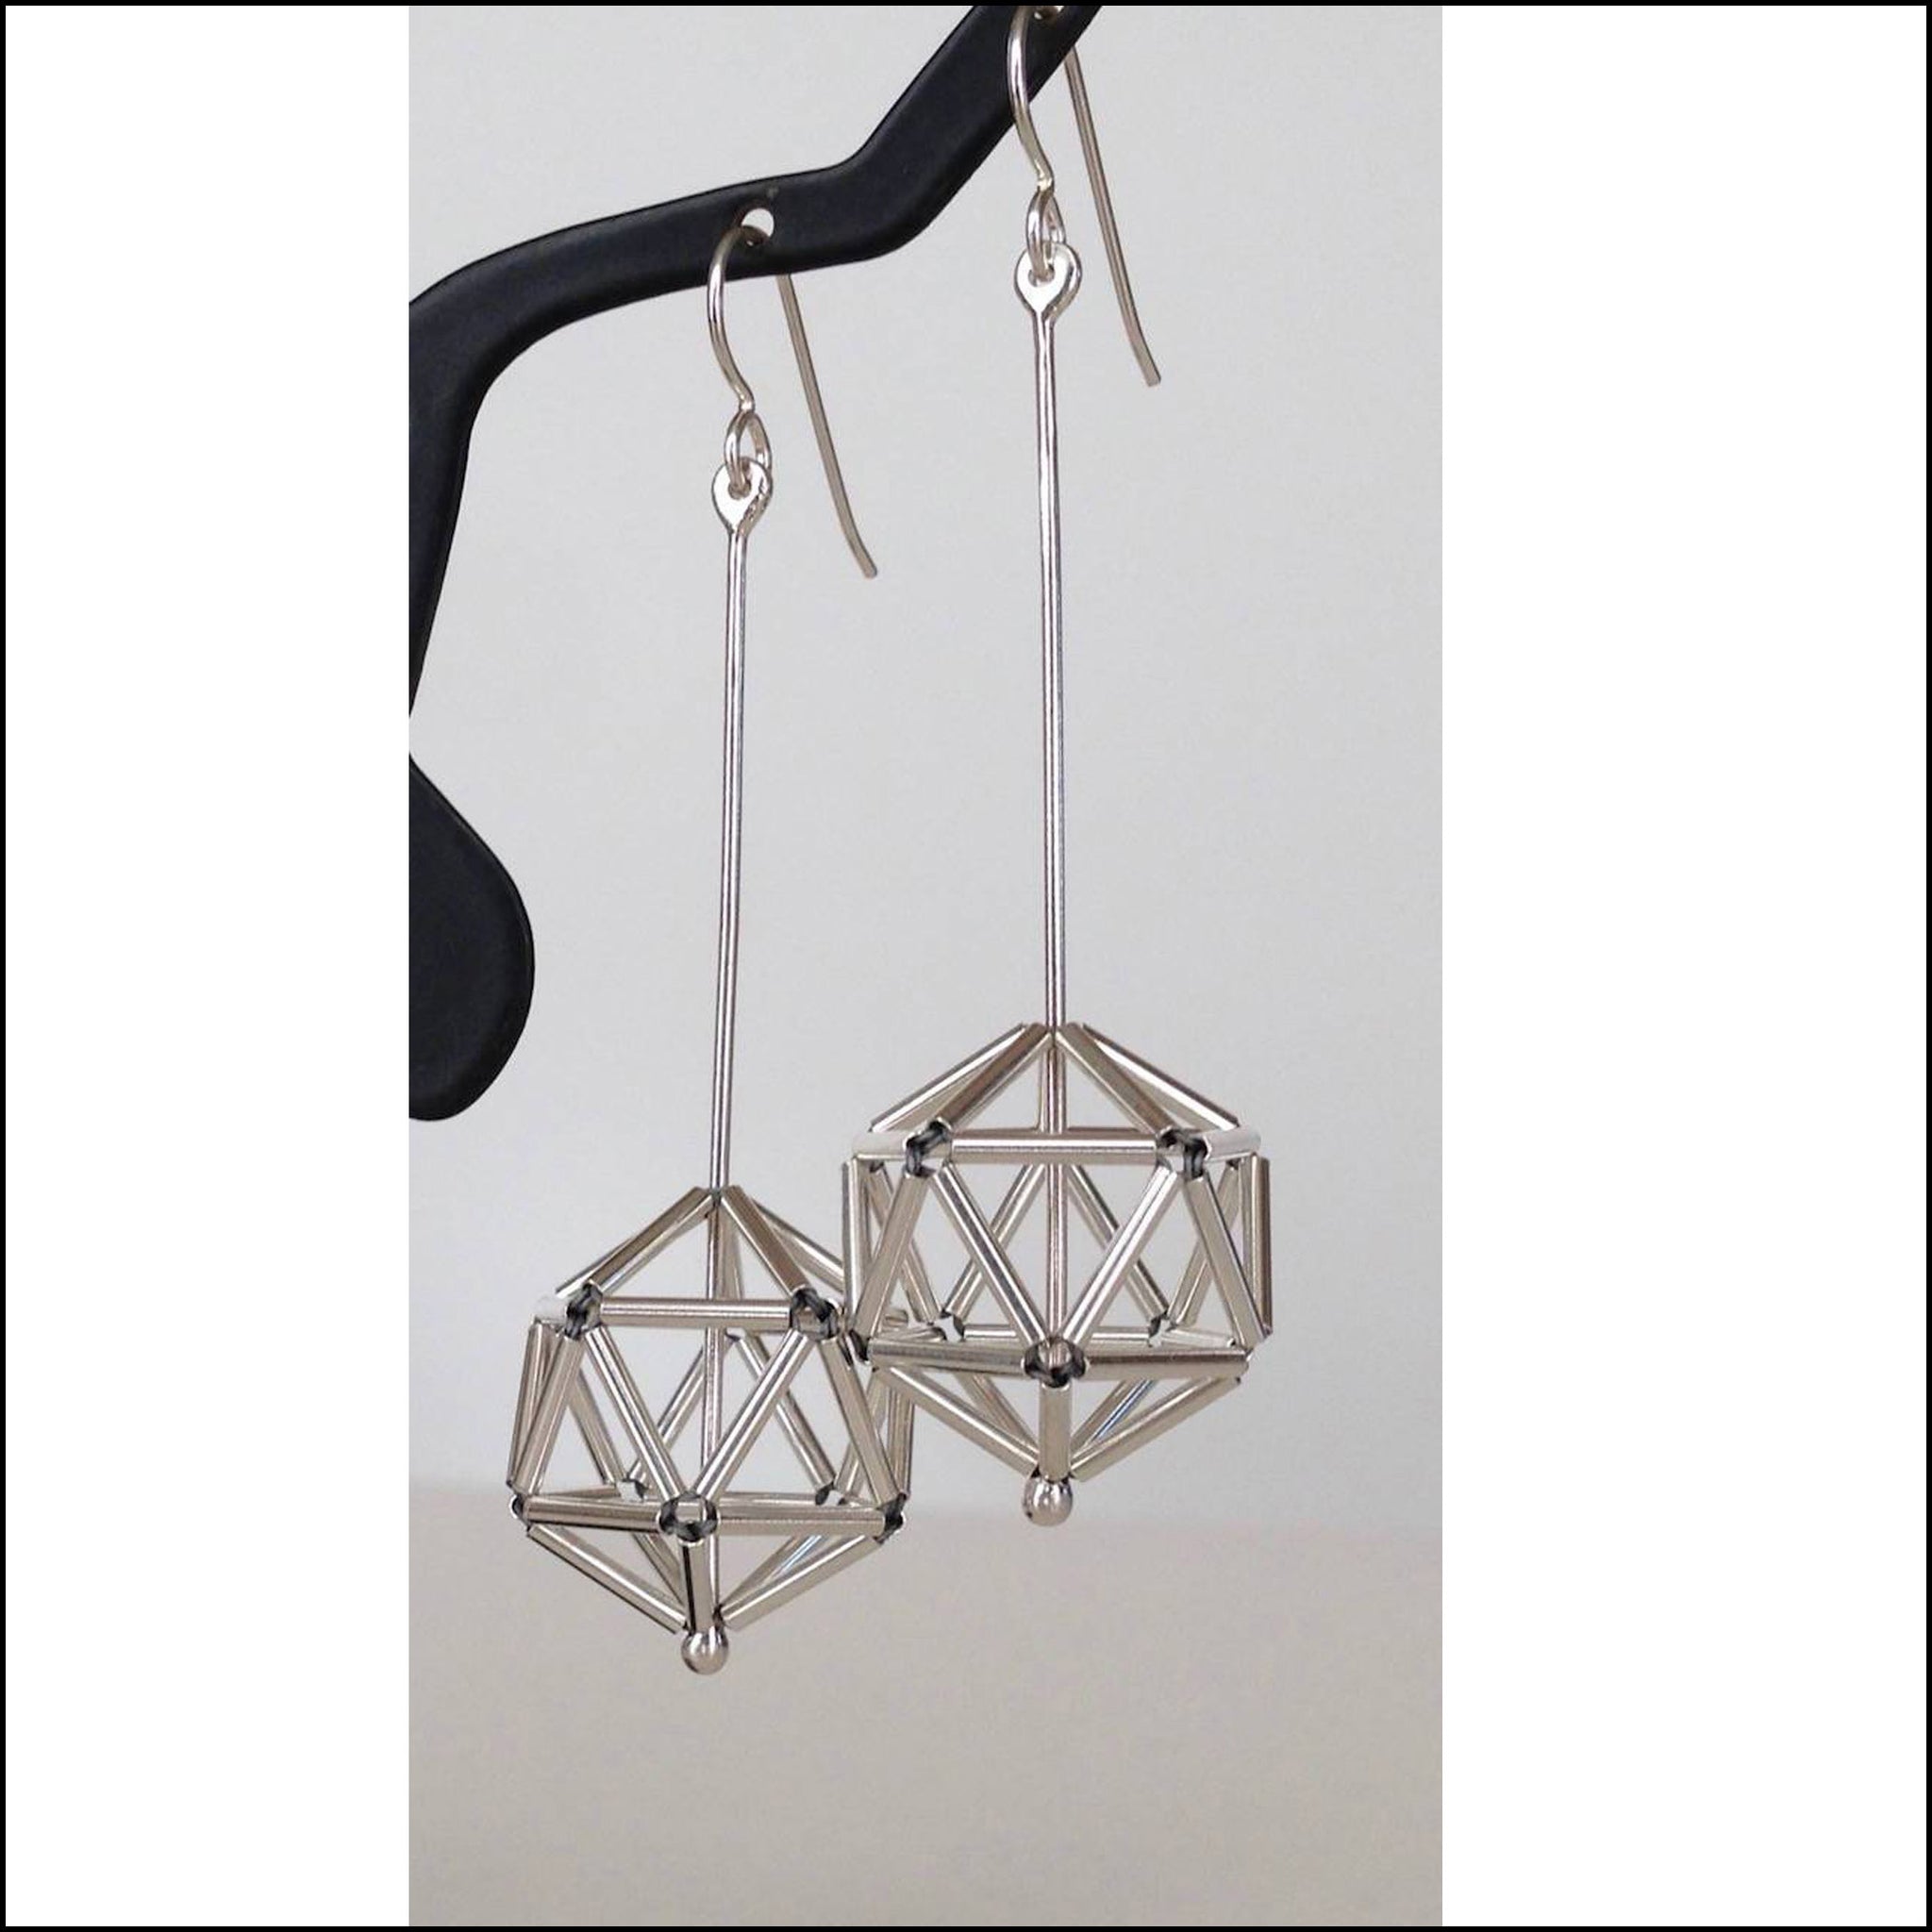 woven icosahedron earrings - made to order